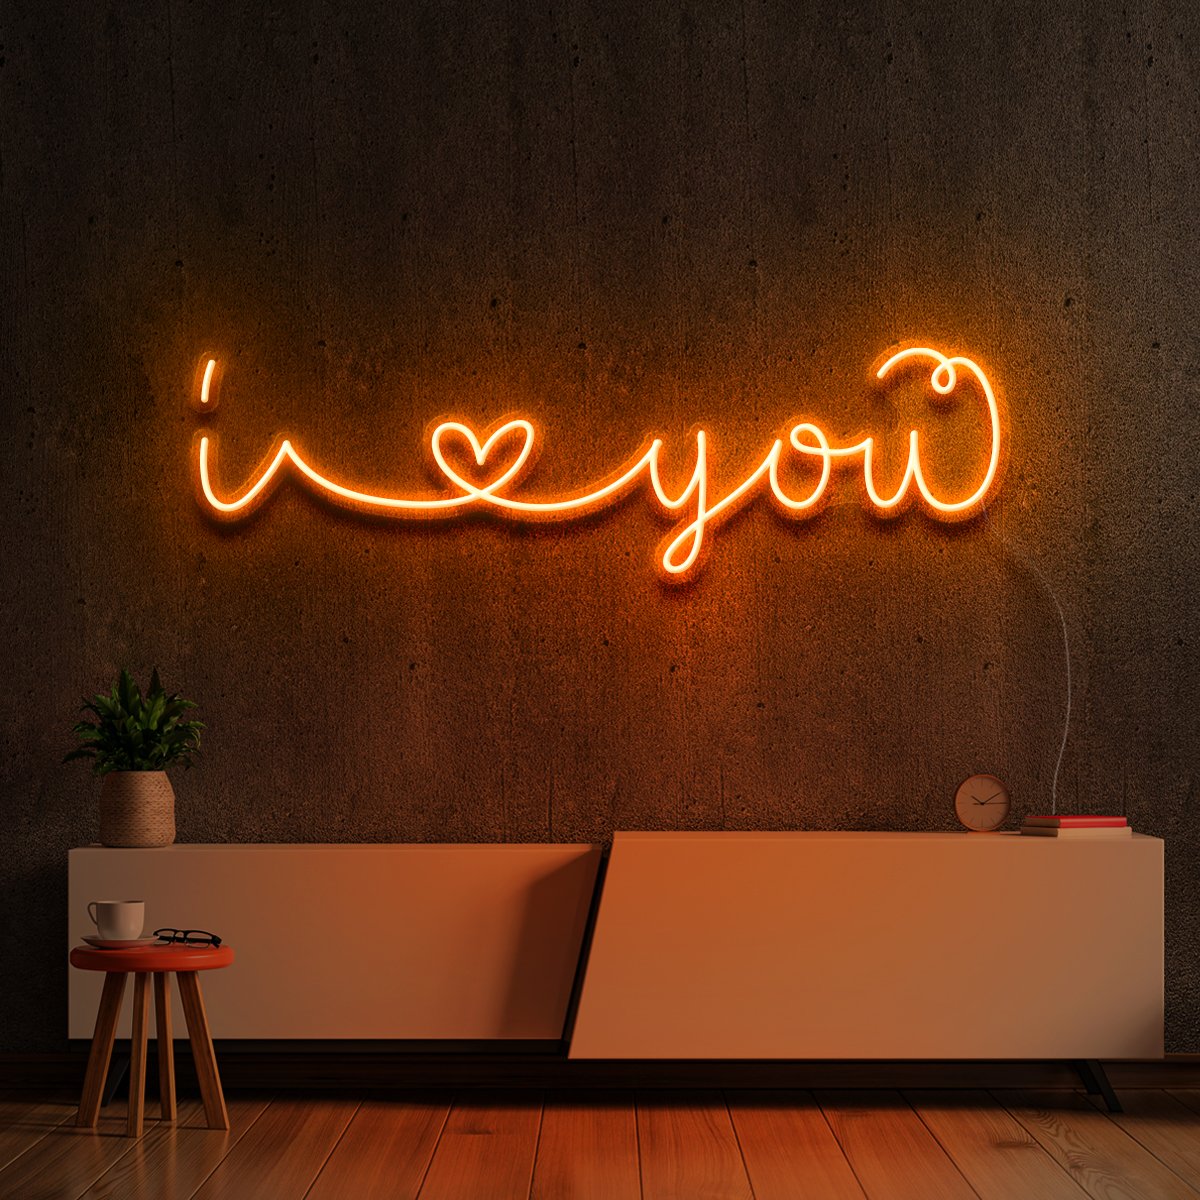 "I Love You" Neon Sign 60cm (2ft) / Orange / LED Neon by Neon Icons